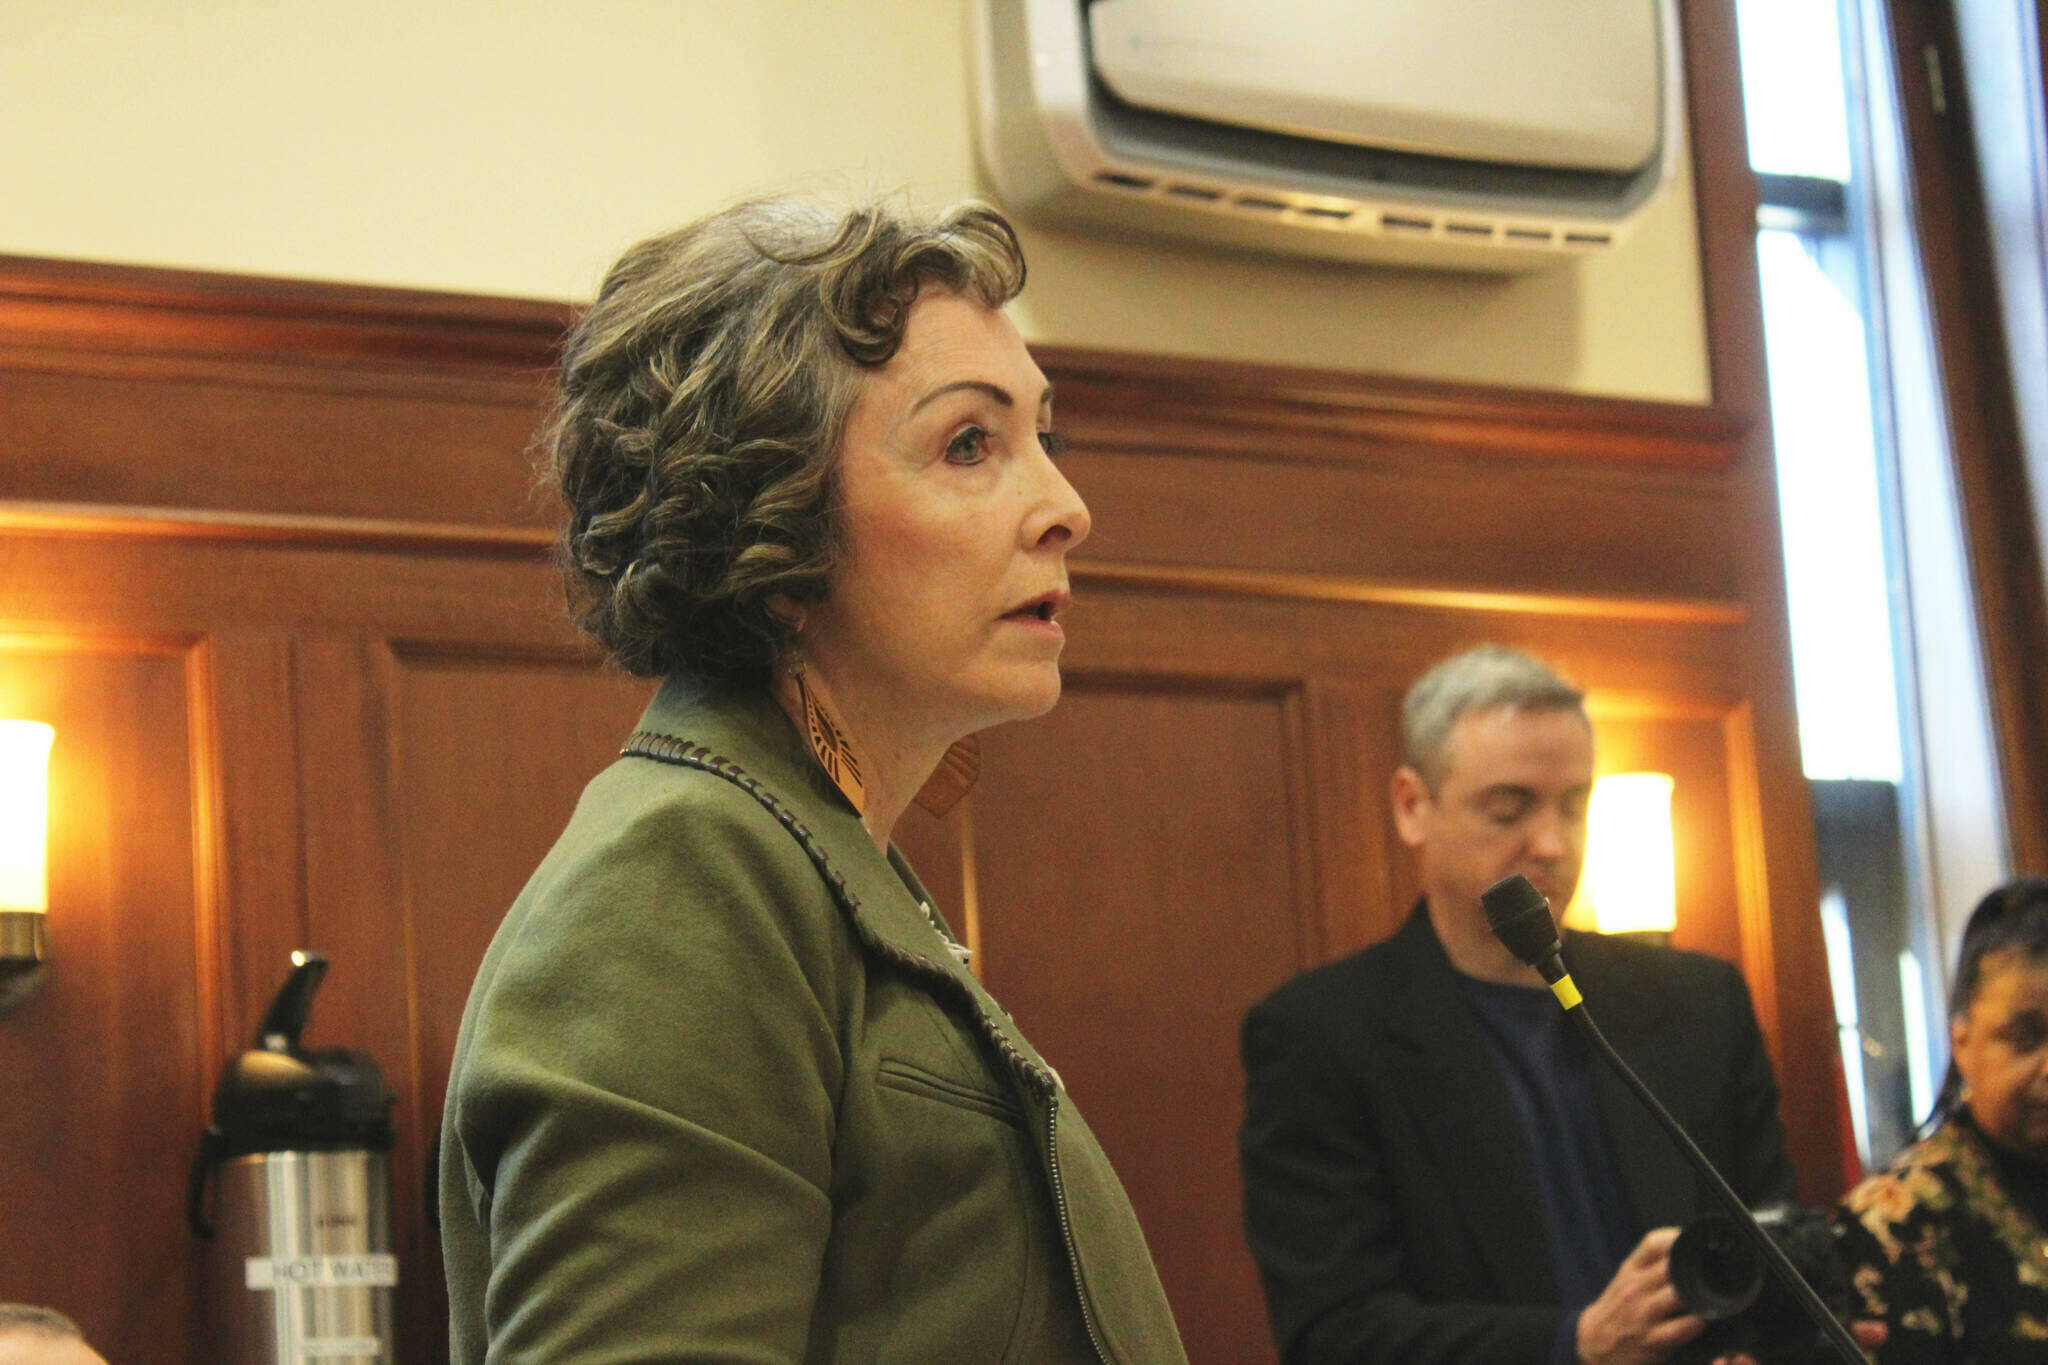 Sen. Shelley Hughes, R-Palmer, speaks in support of Senate concurrence on a version of an education bill passed by the Alaska House last week during a Senate floor discussion on Monday. (Ashlyn O’Hara/Peninsula Clarion)